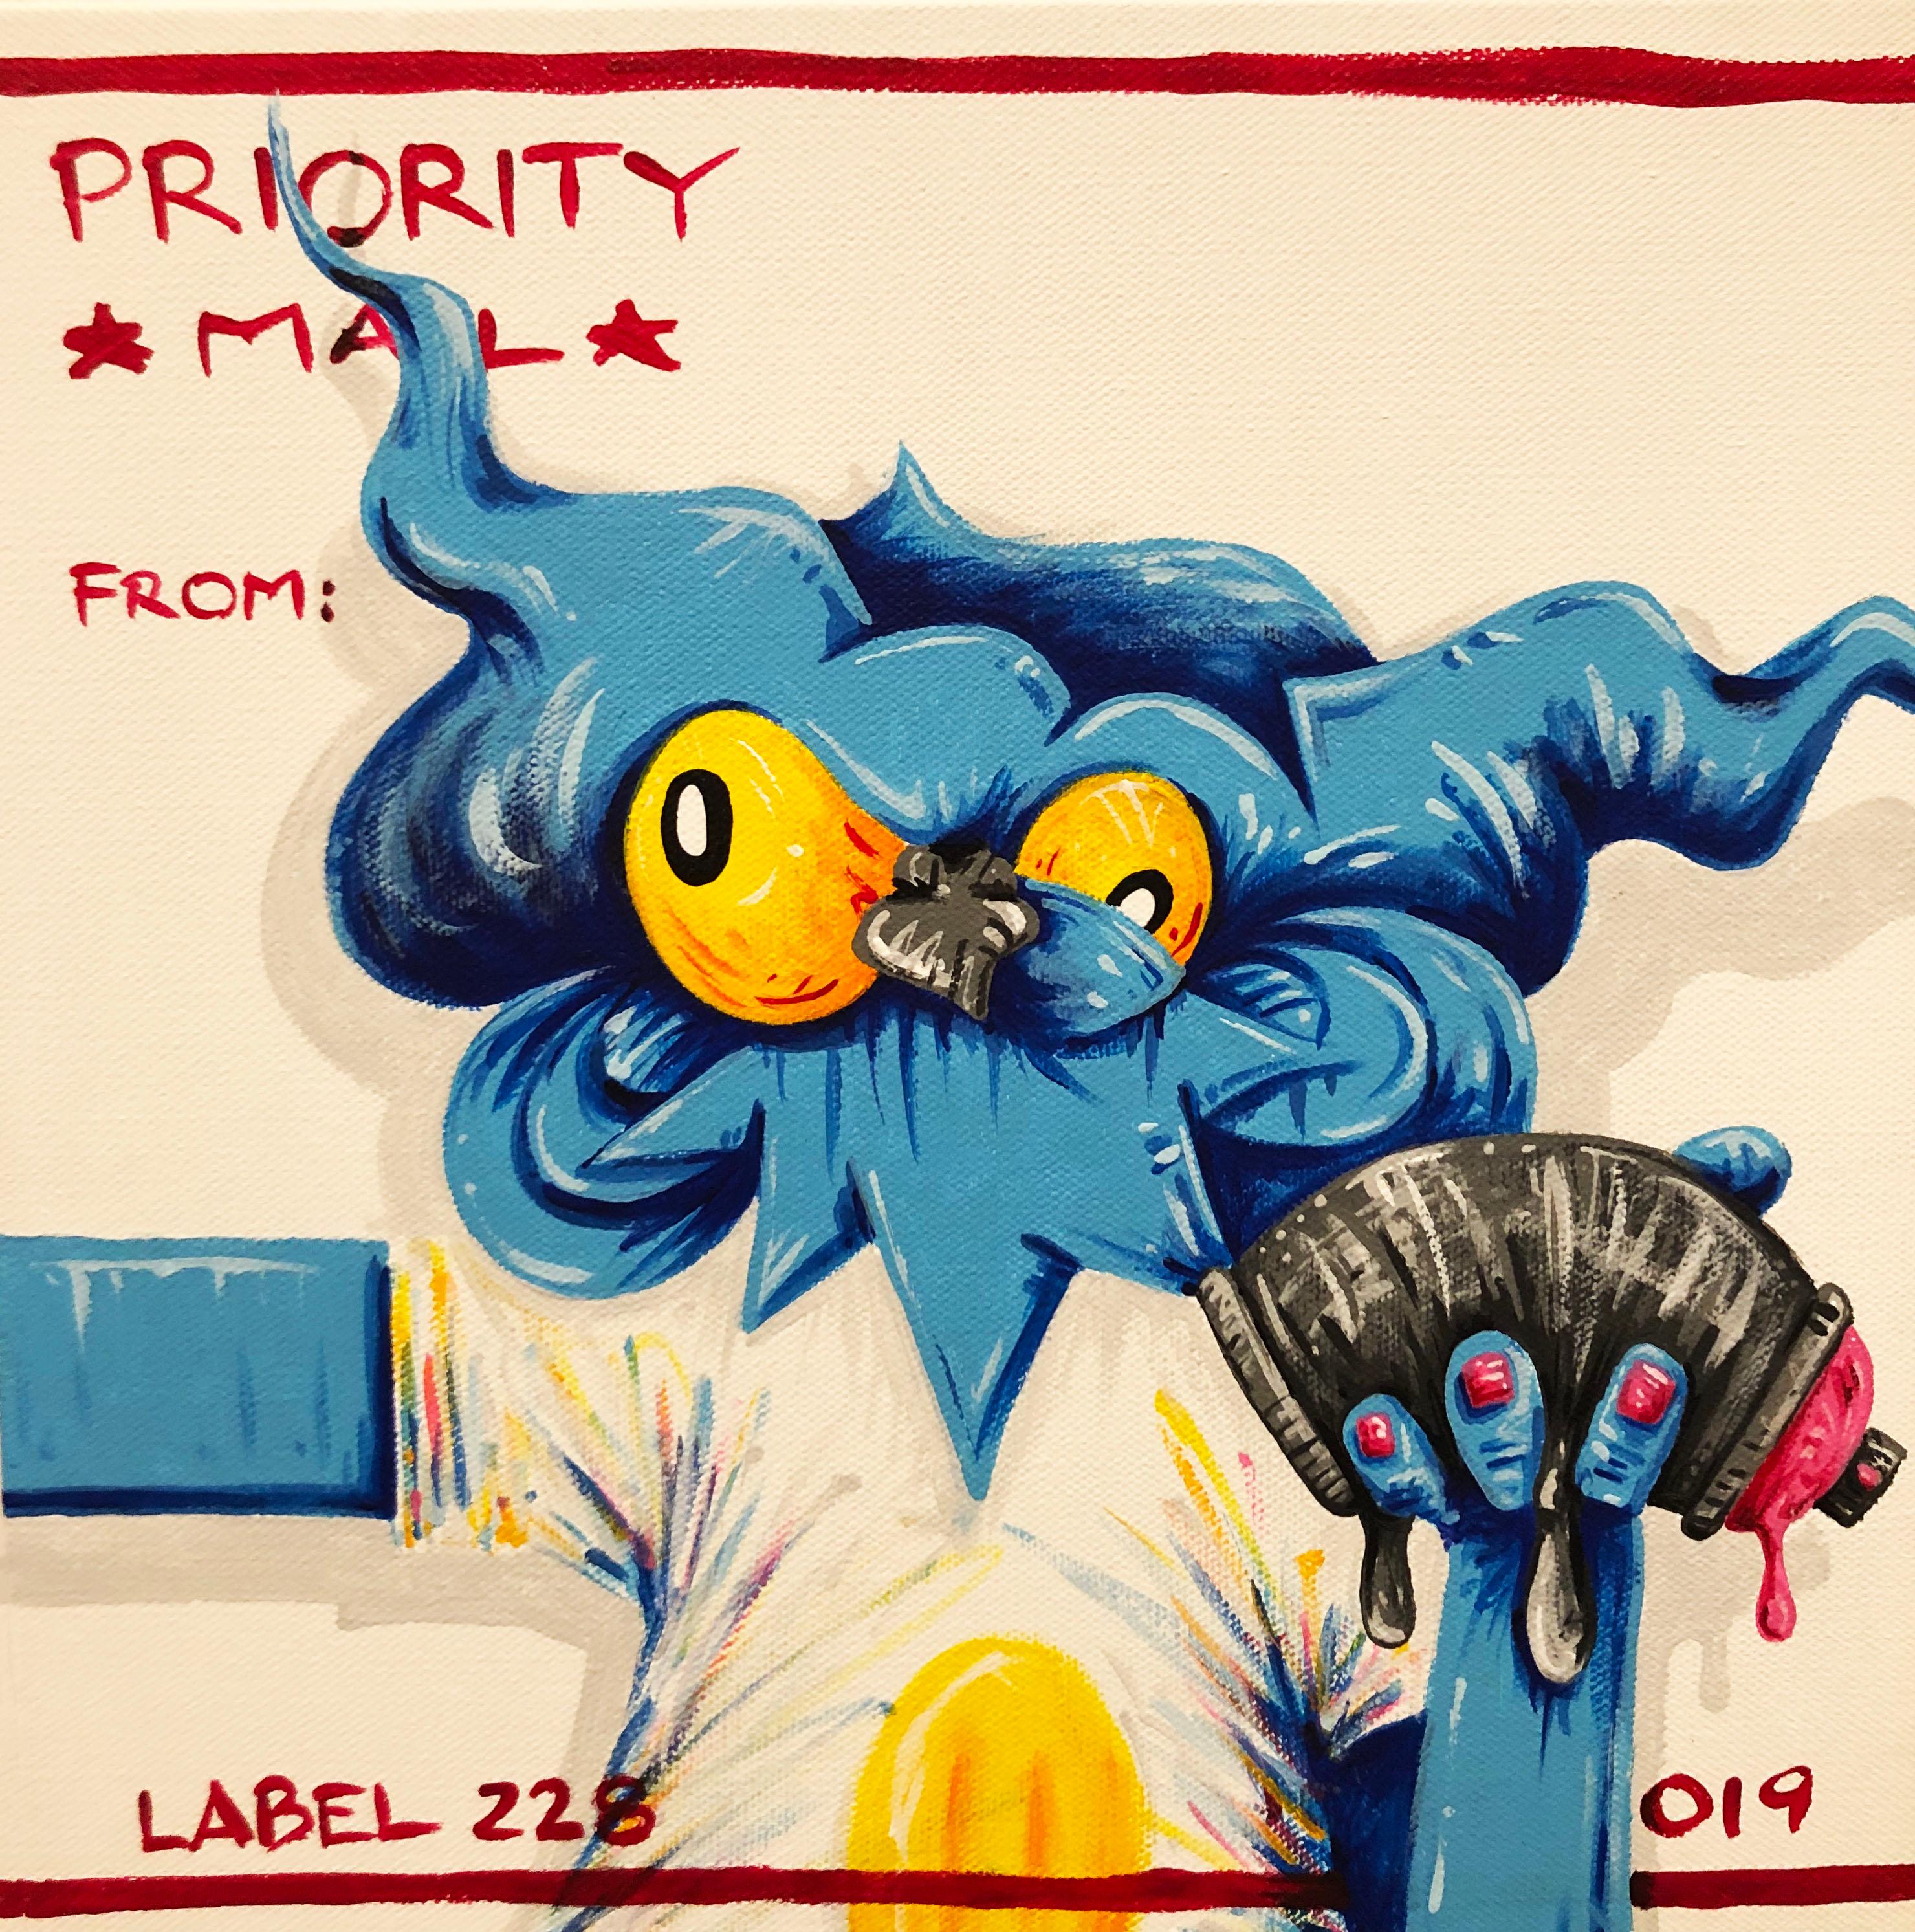 Priority Mail - Painting by Nite Owl